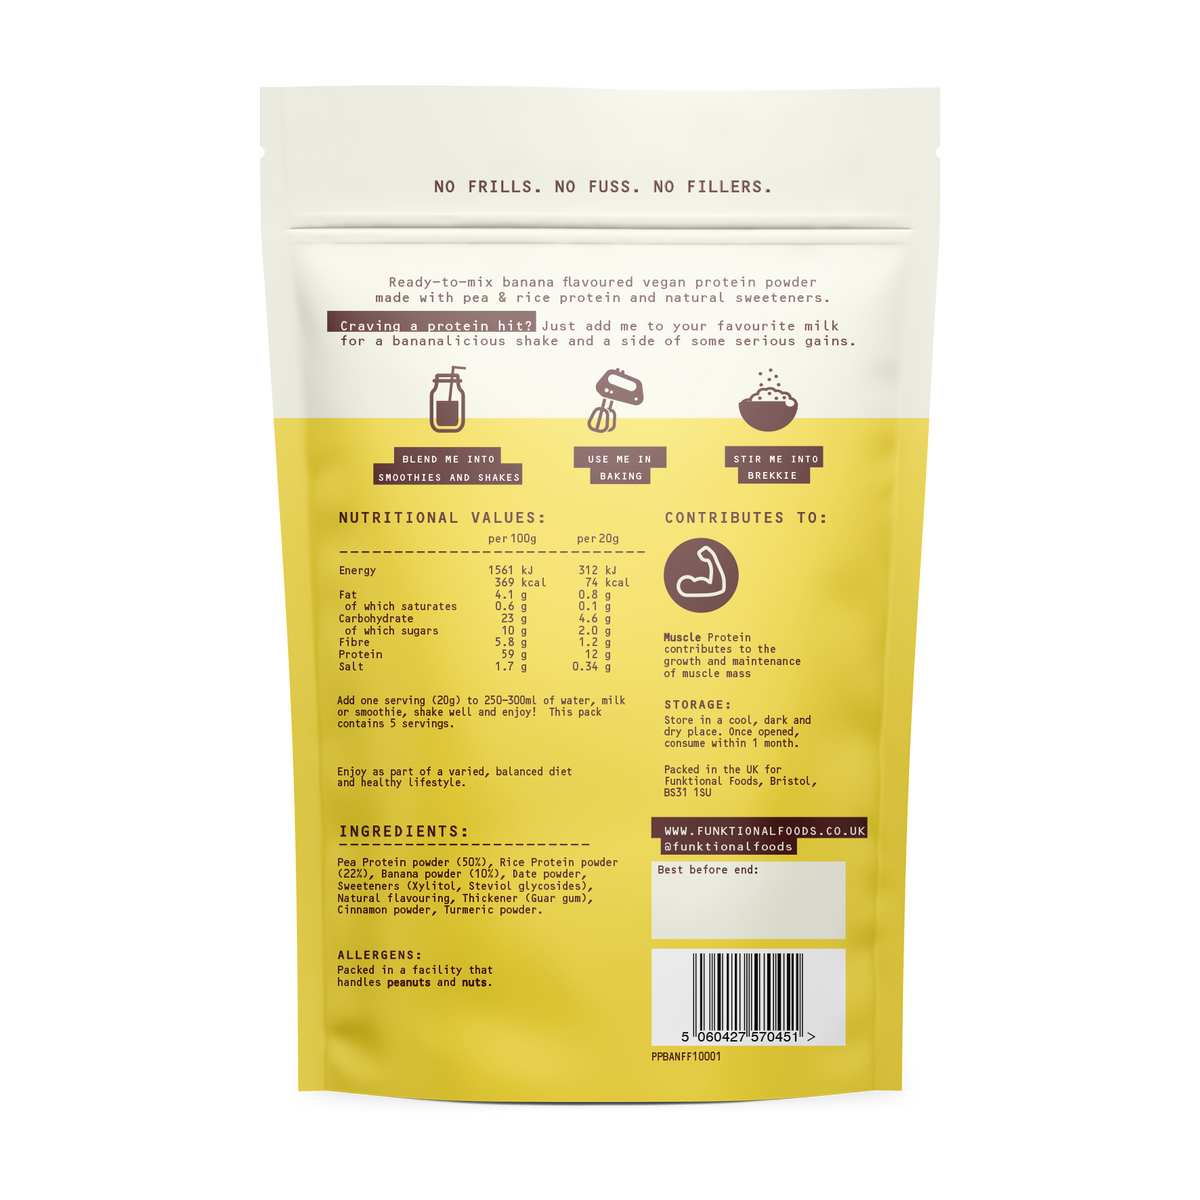 Funktional Foods Protein Blend Banana (100G)